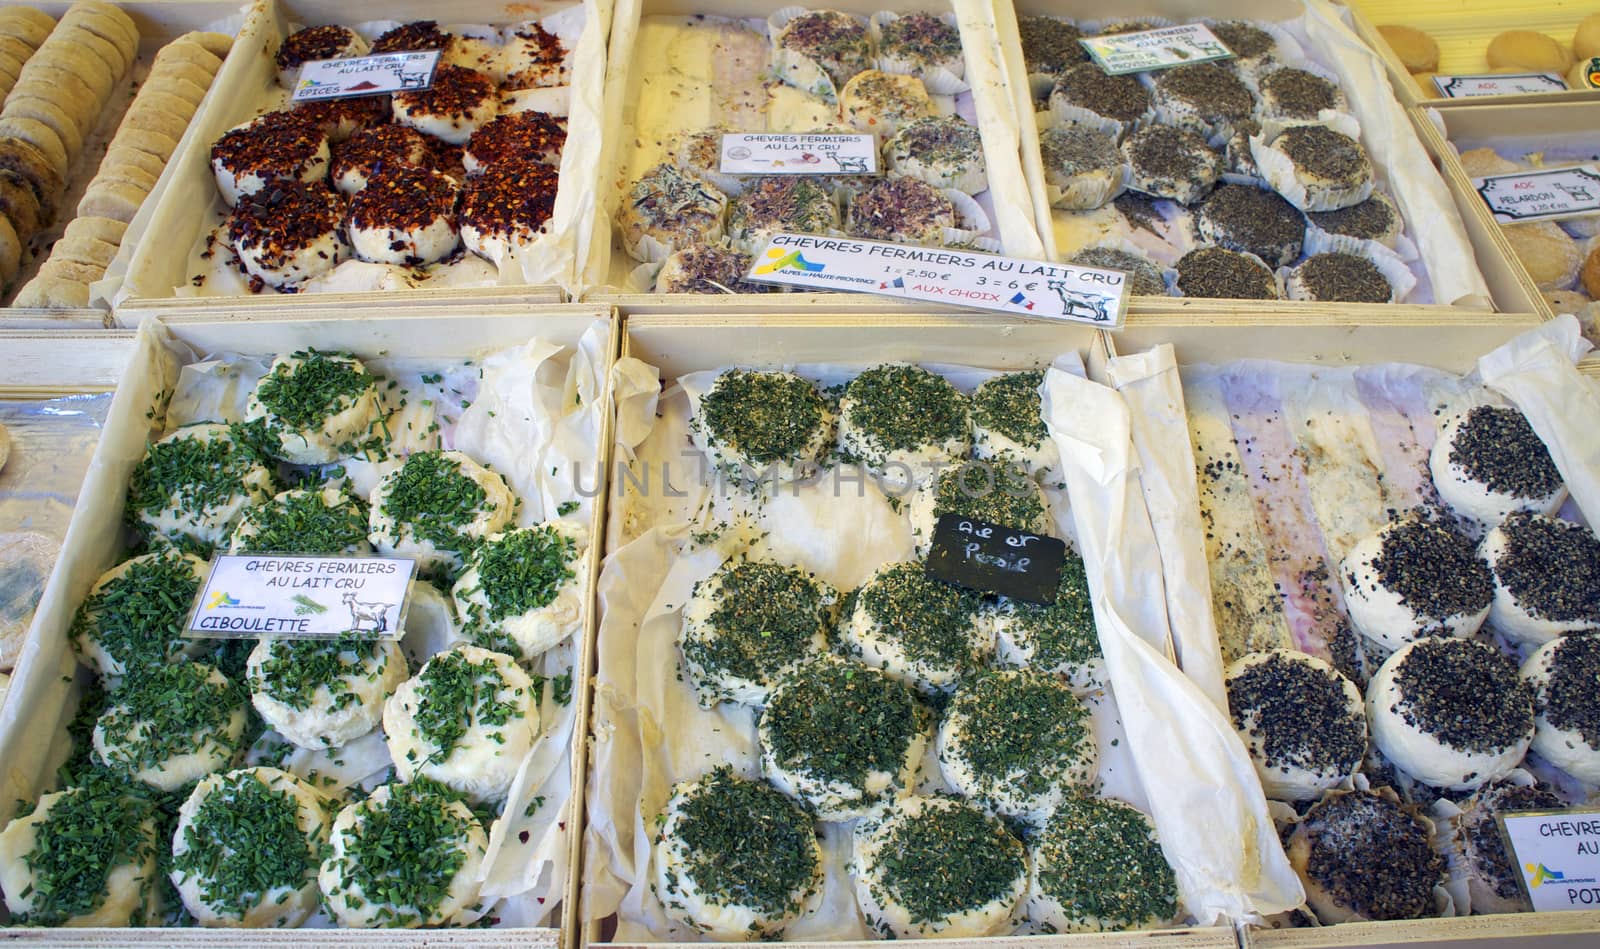 A variety of goat cheeses at an outdoor market located in Aix-en-Provence, a small city in Provence, France